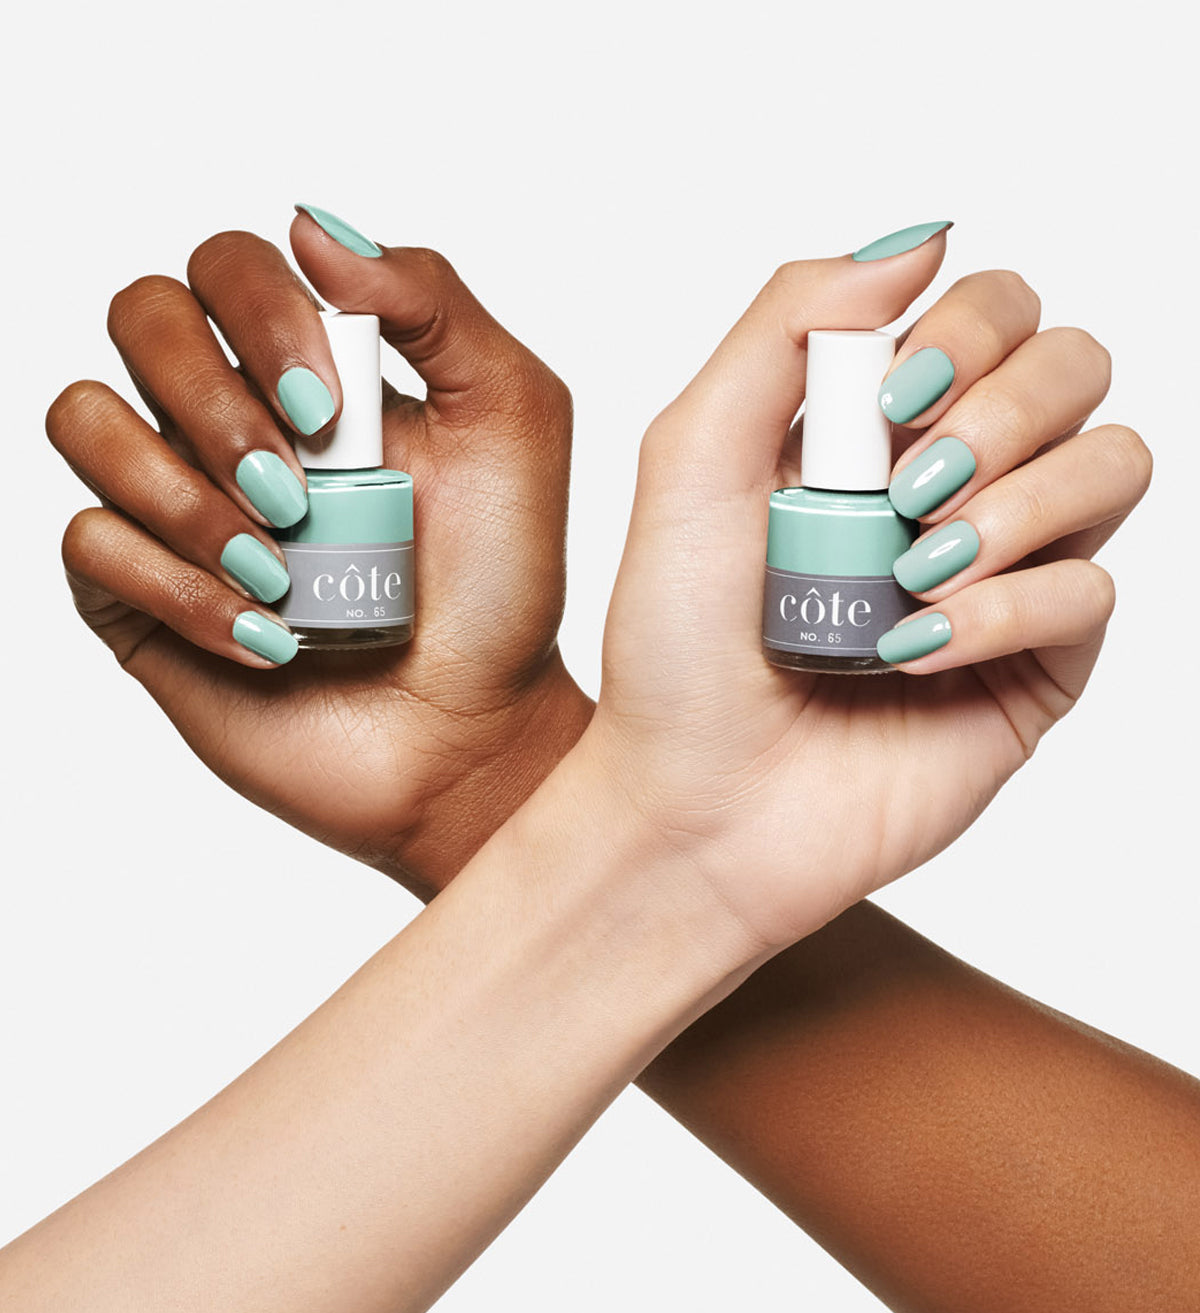 Teal Nails Shades To Freshen Up Your Style - Nail Designs Journal